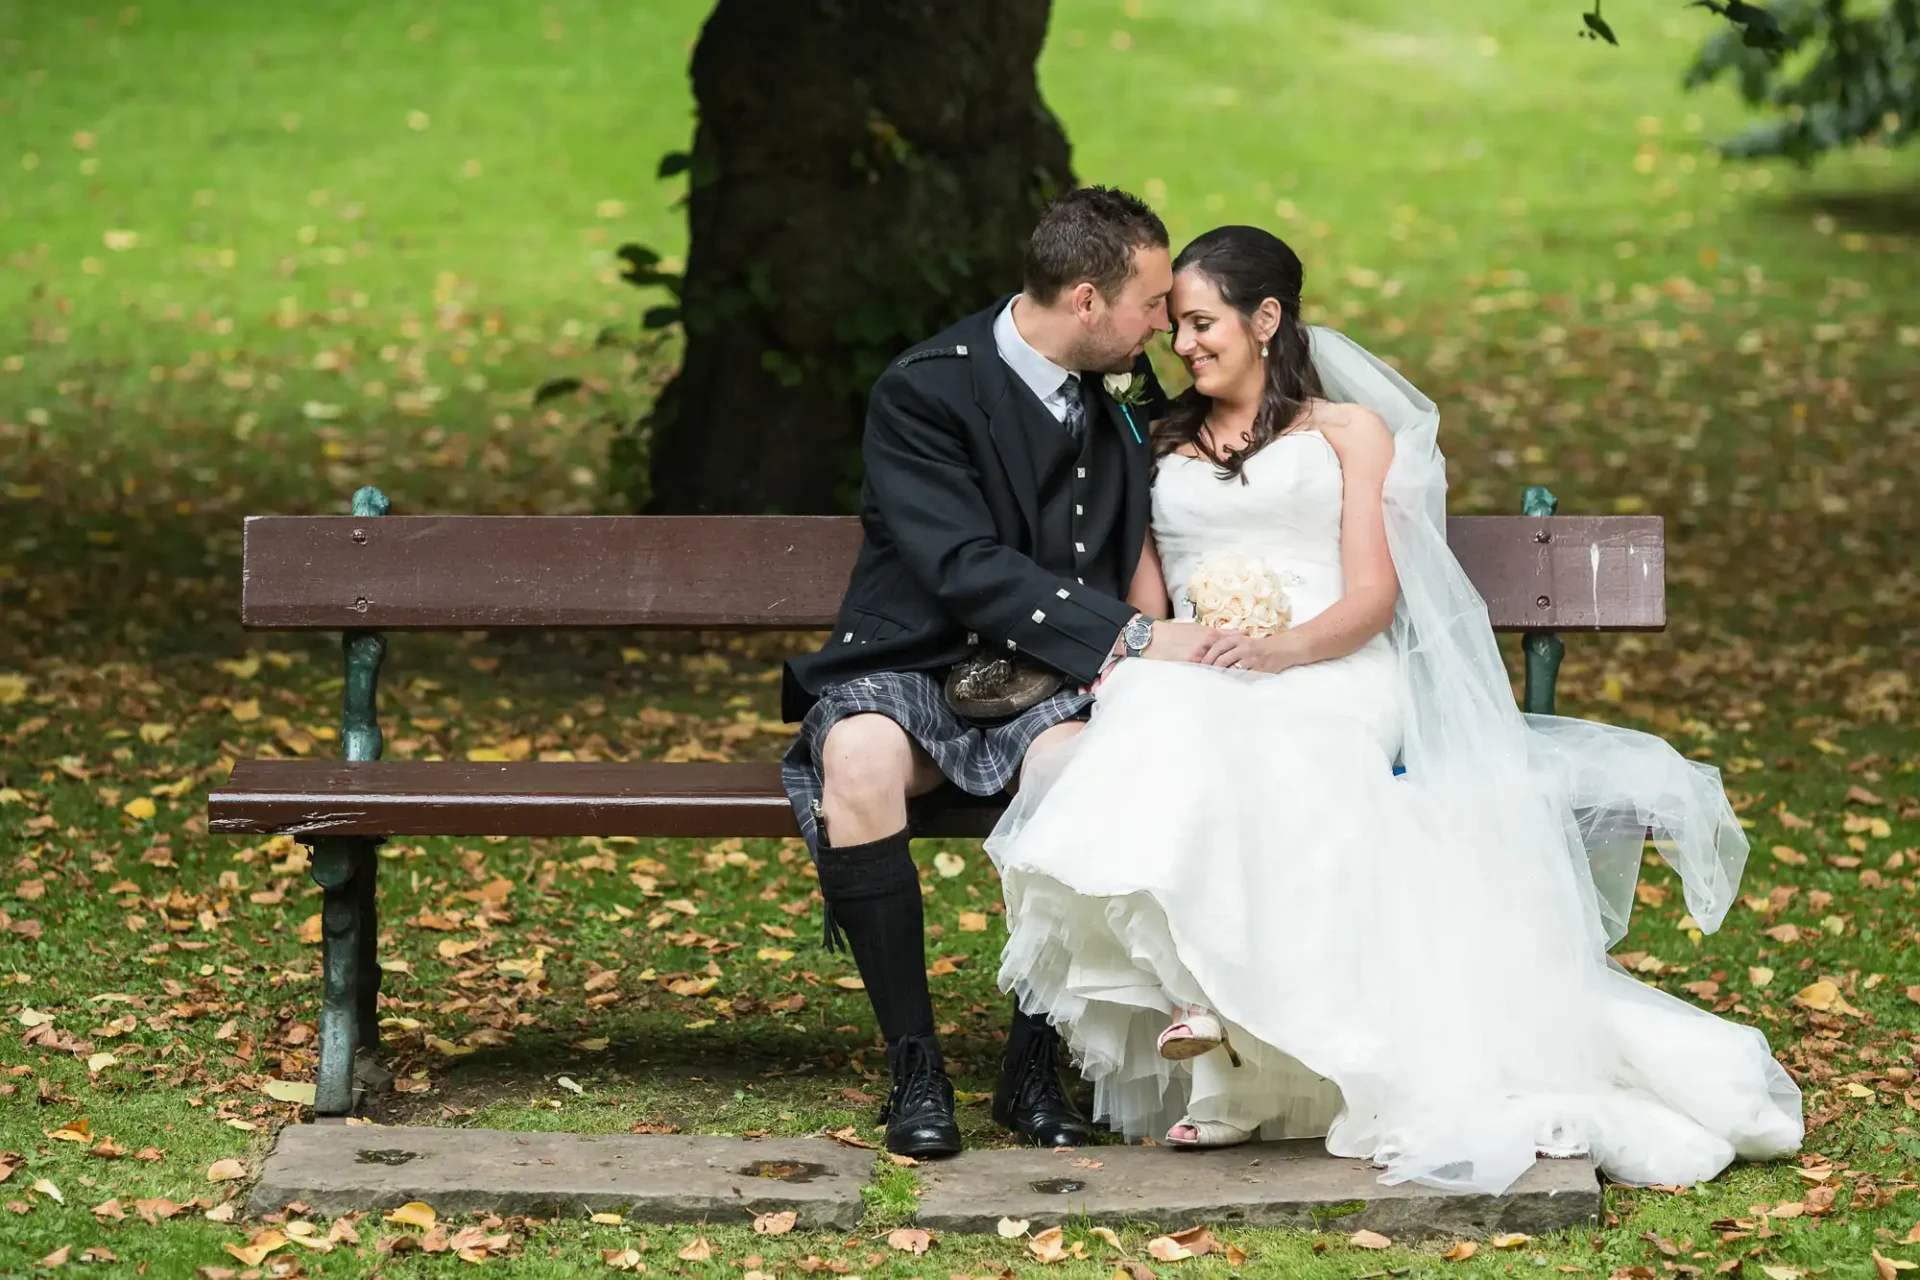 A bride in a white dress and a groom in a kilt sitting on a park bench, affectionately touching foreheads under a tree.